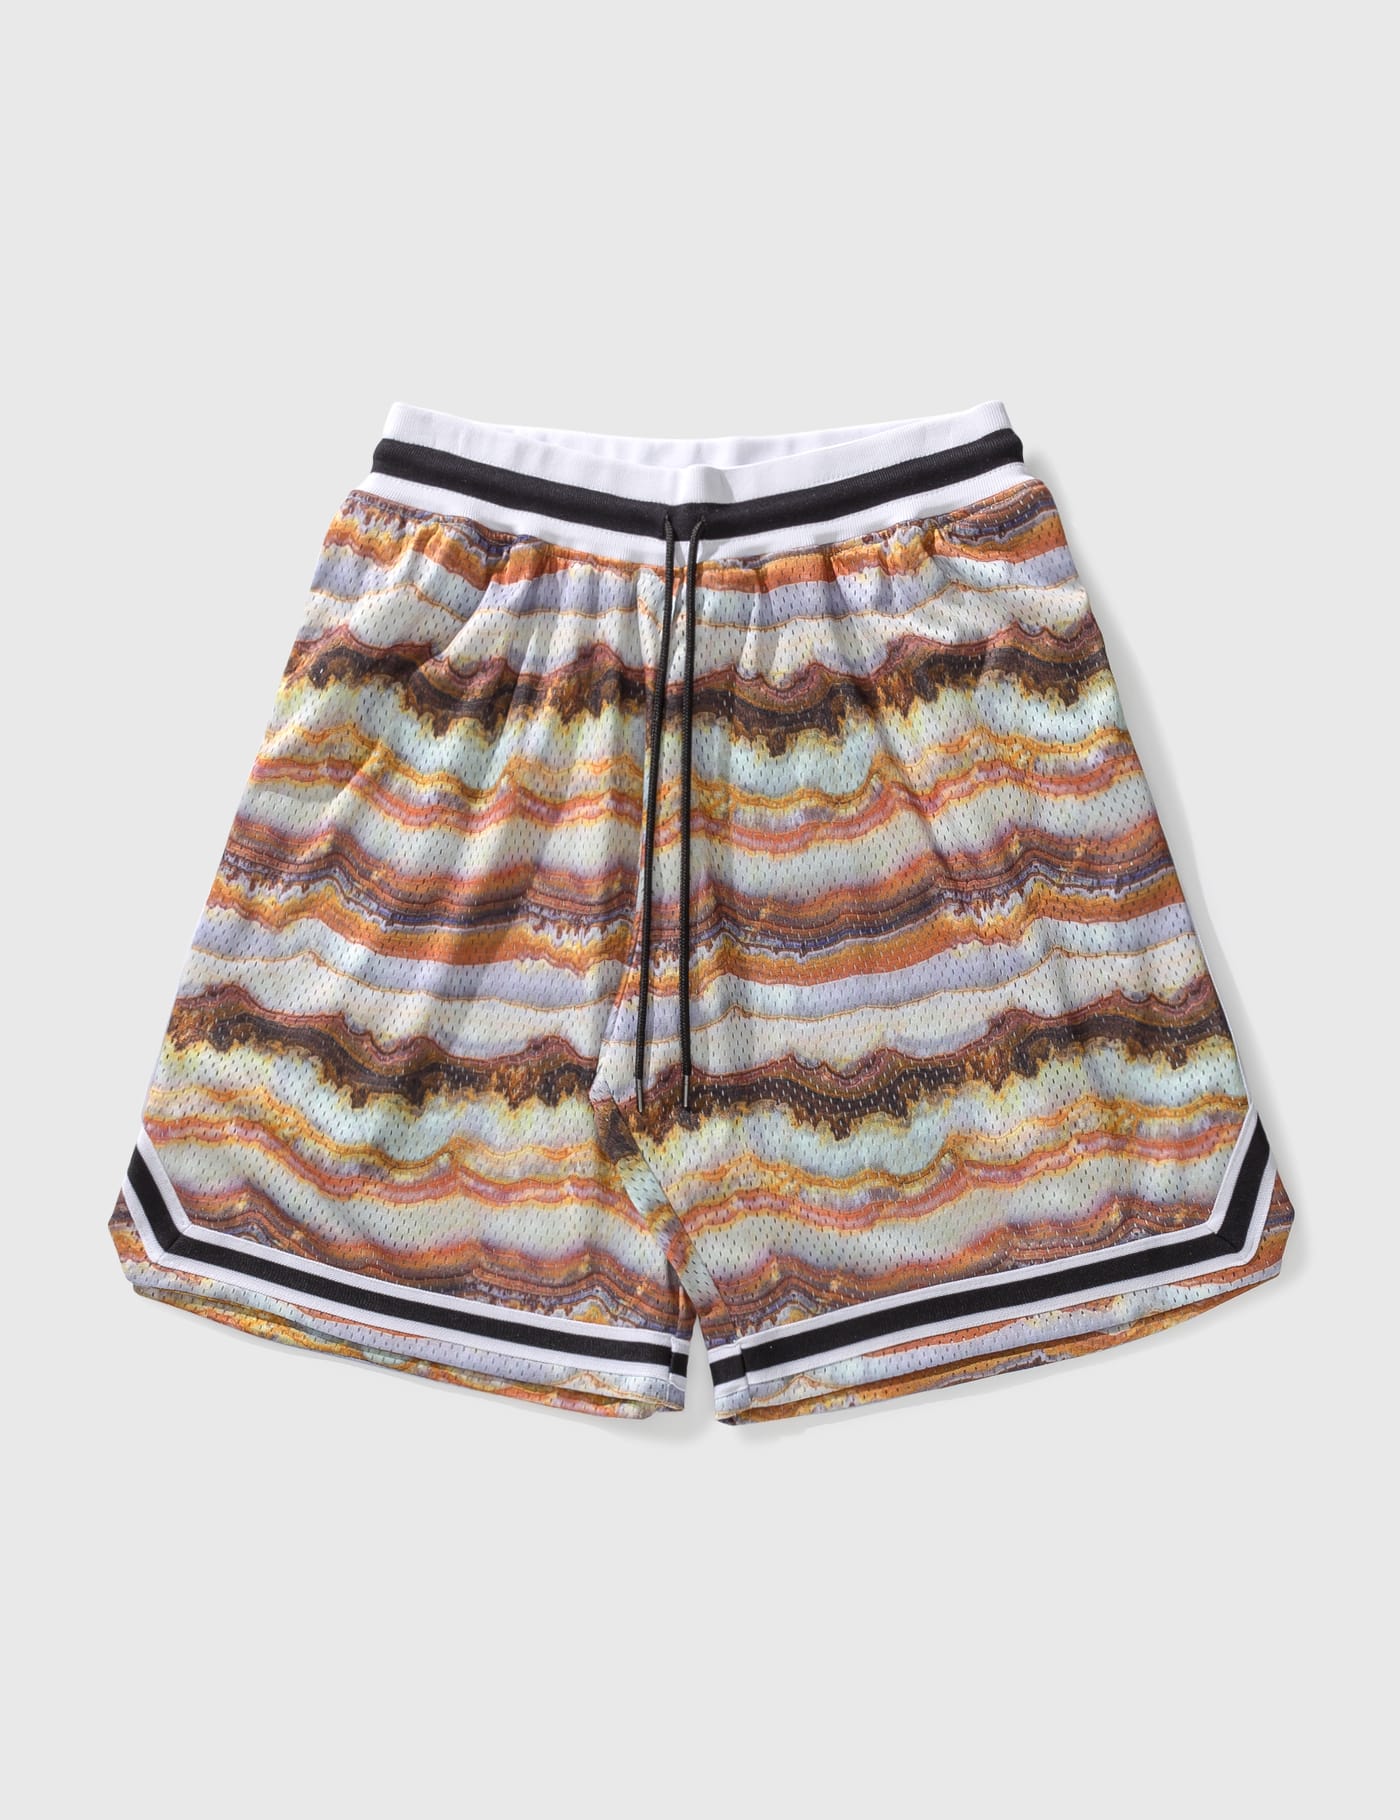 John Elliott - Game Shorts | HBX - Globally Curated Fashion and